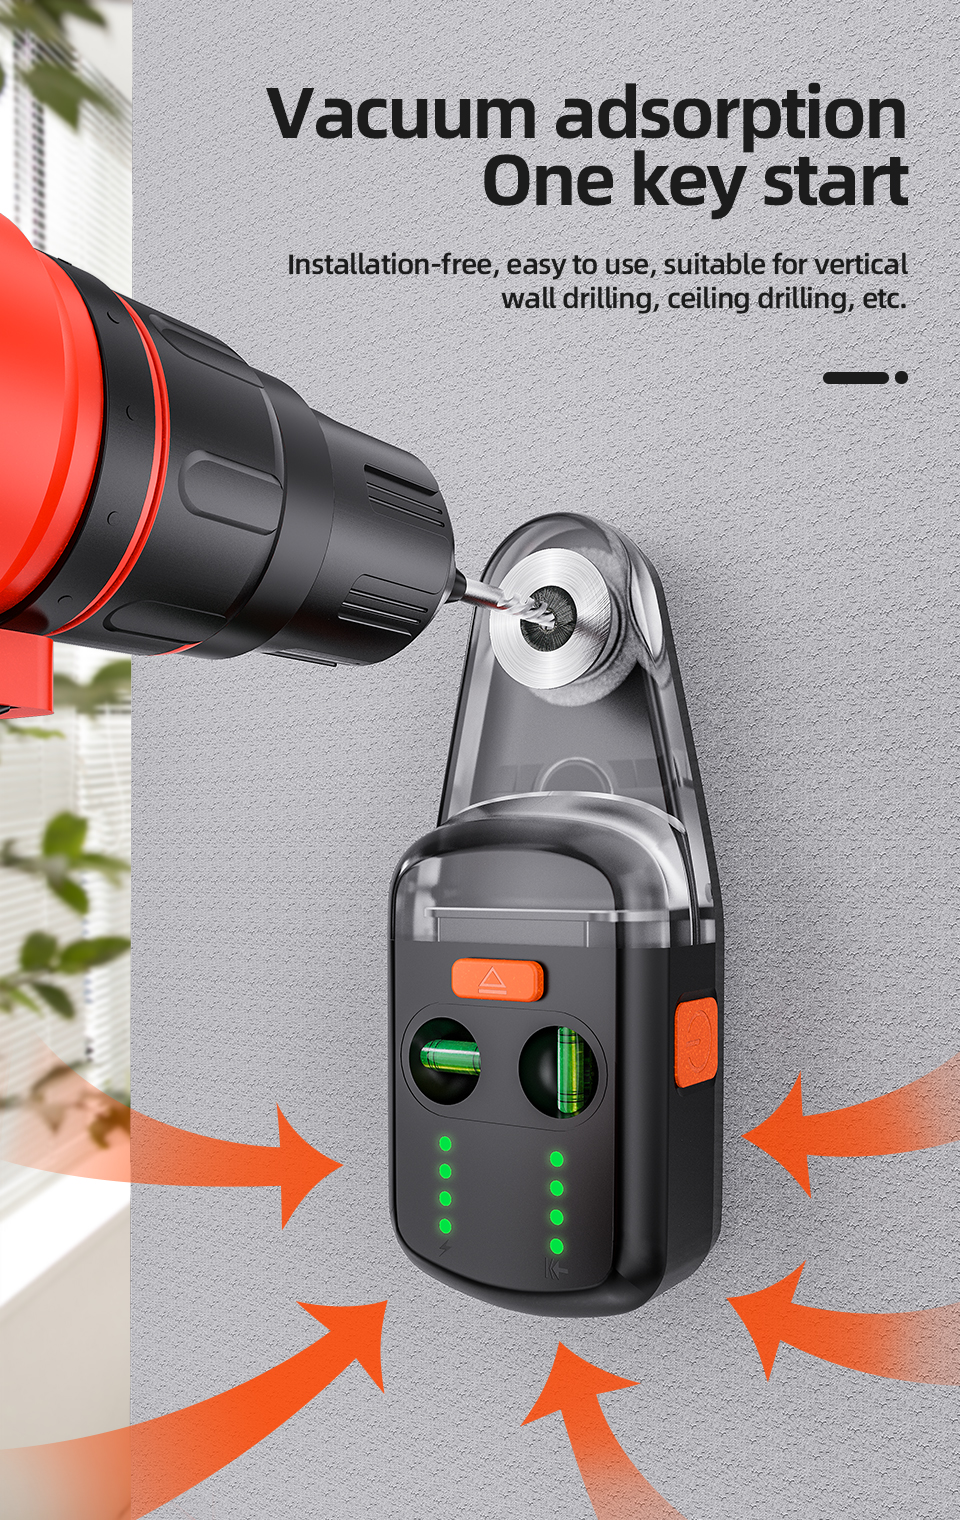 Laser-Level-Support-Drill-Dust-Collector-Electric-Vacuum-Suction-Tool-Two-Bubbles-L-Shape-Bracket-Dr-1900444-5